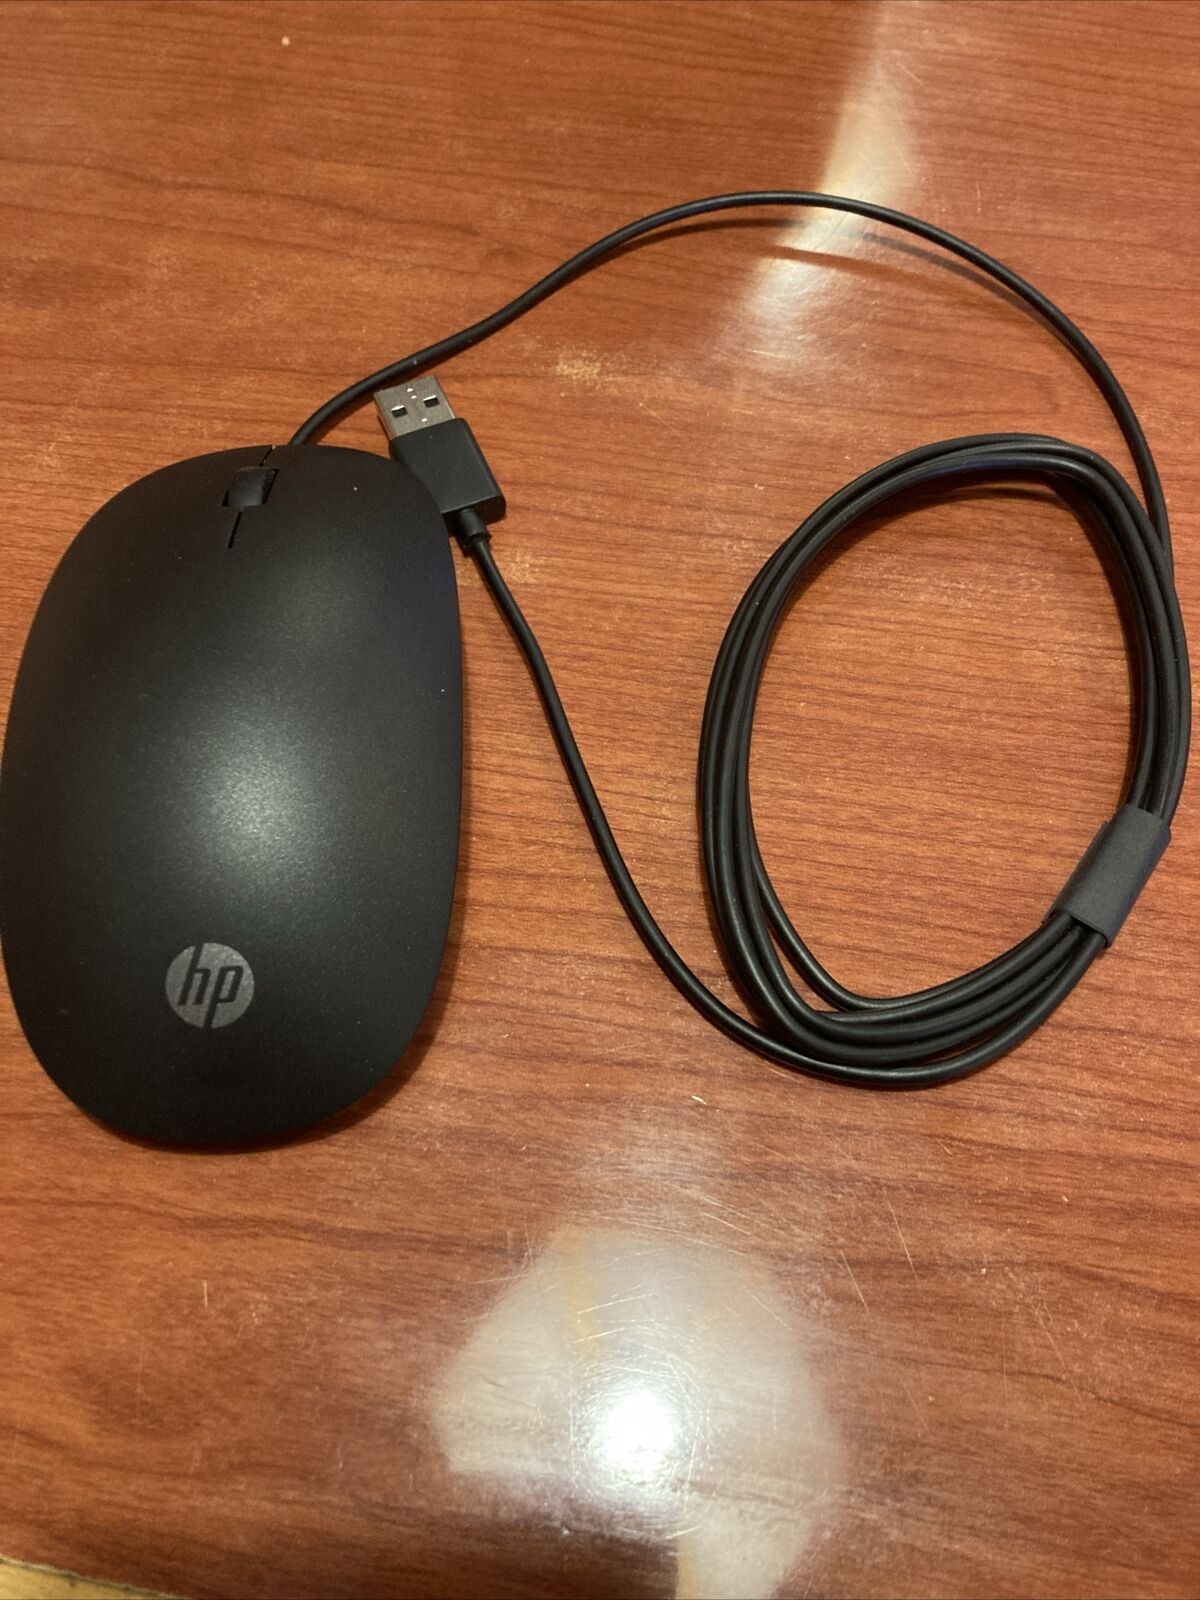 HP Original OEM Wired Mouse Desk Top PC Model TPC - C002M Brand New